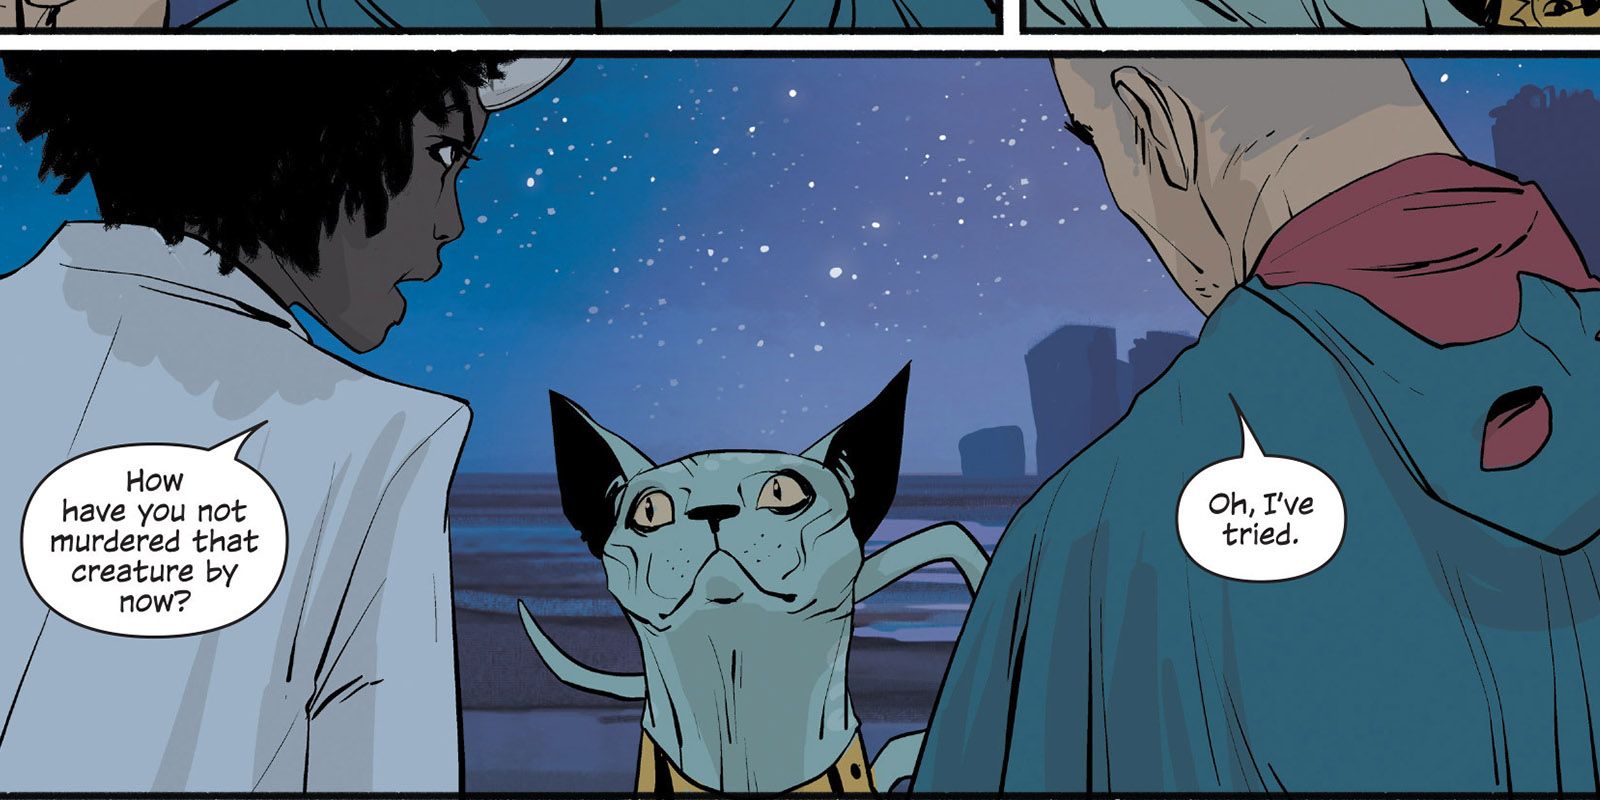 Lying Cat from Saga looking at two characters